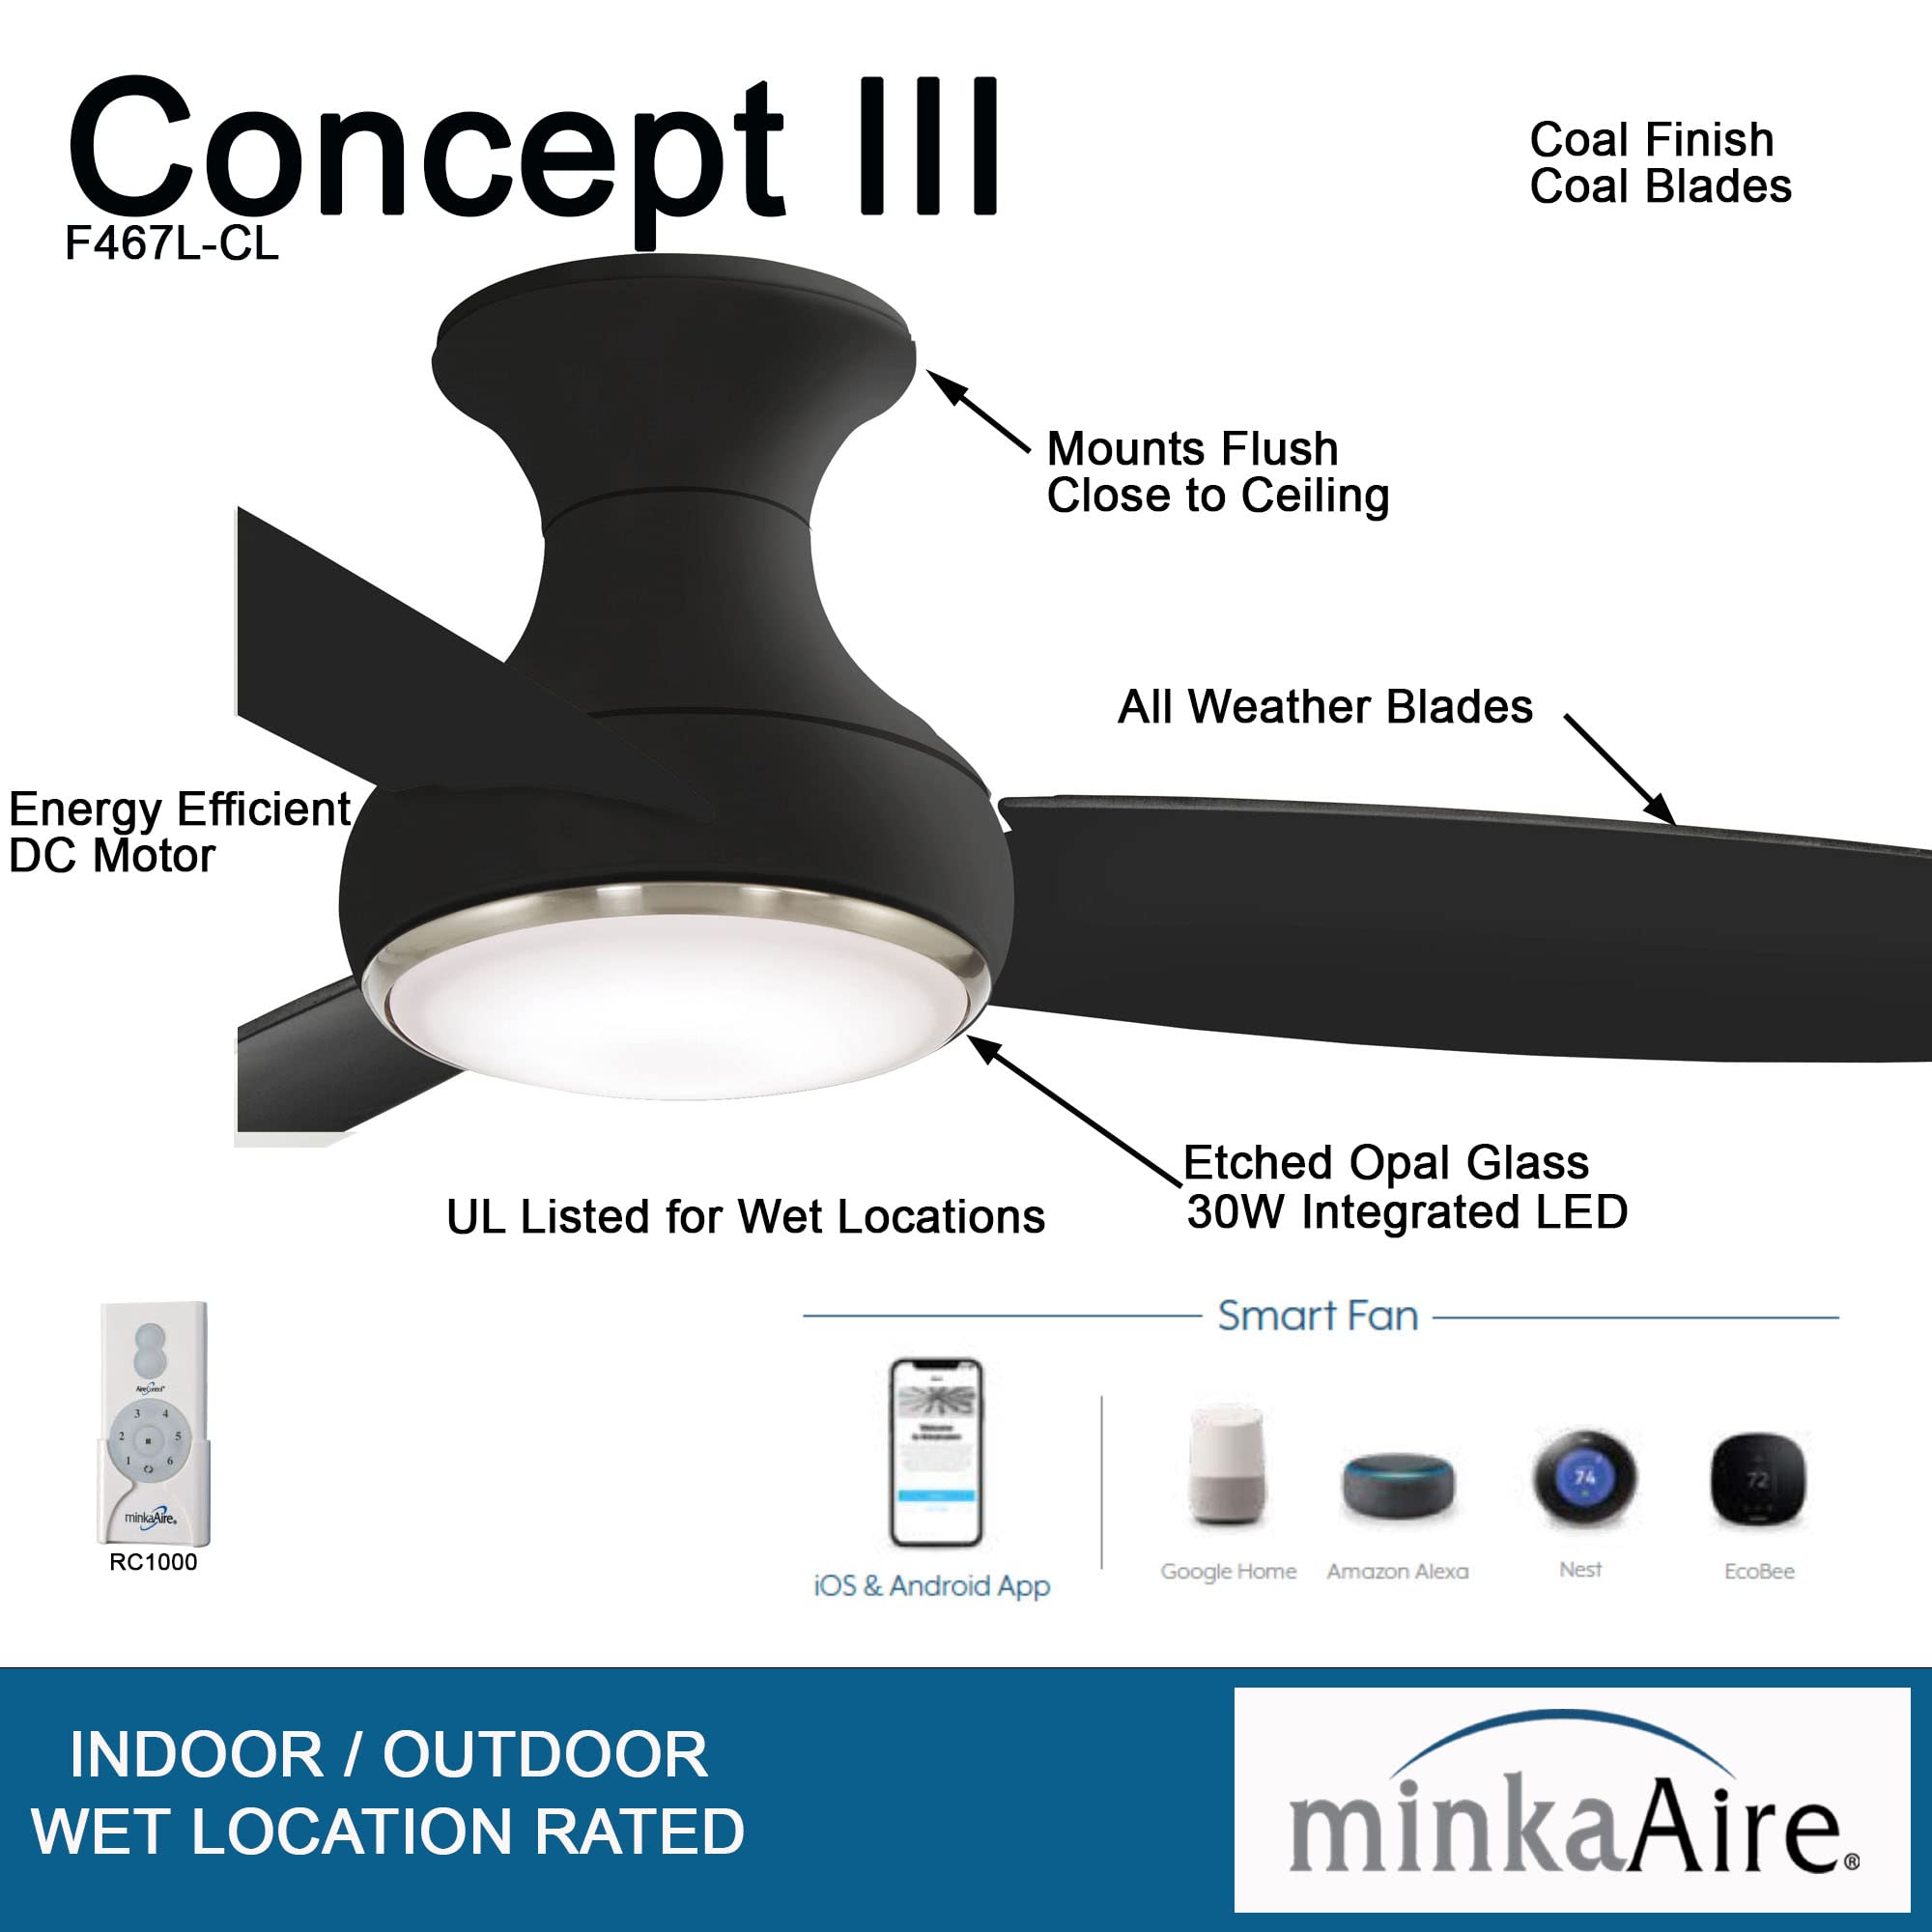 Minka Aire F467L-CL Concept III - 54 Inch Ceiling Fan with Light Kit, Coal Finish with Coal Blade Finish with Etched Opal Glass